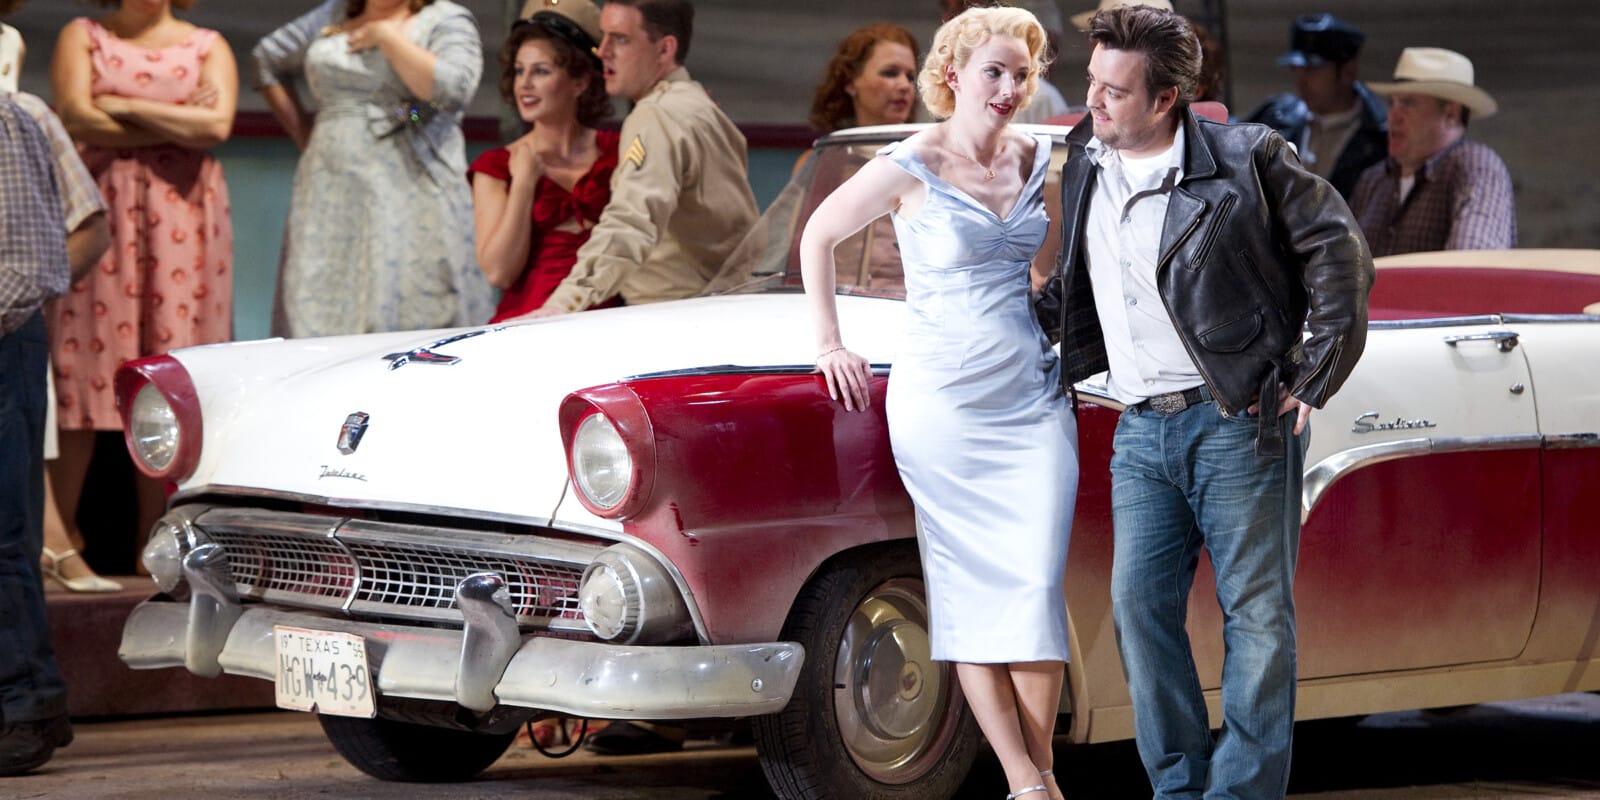 A man in a black leather jacket and a woman in a blue dress stand next to a cream and red car